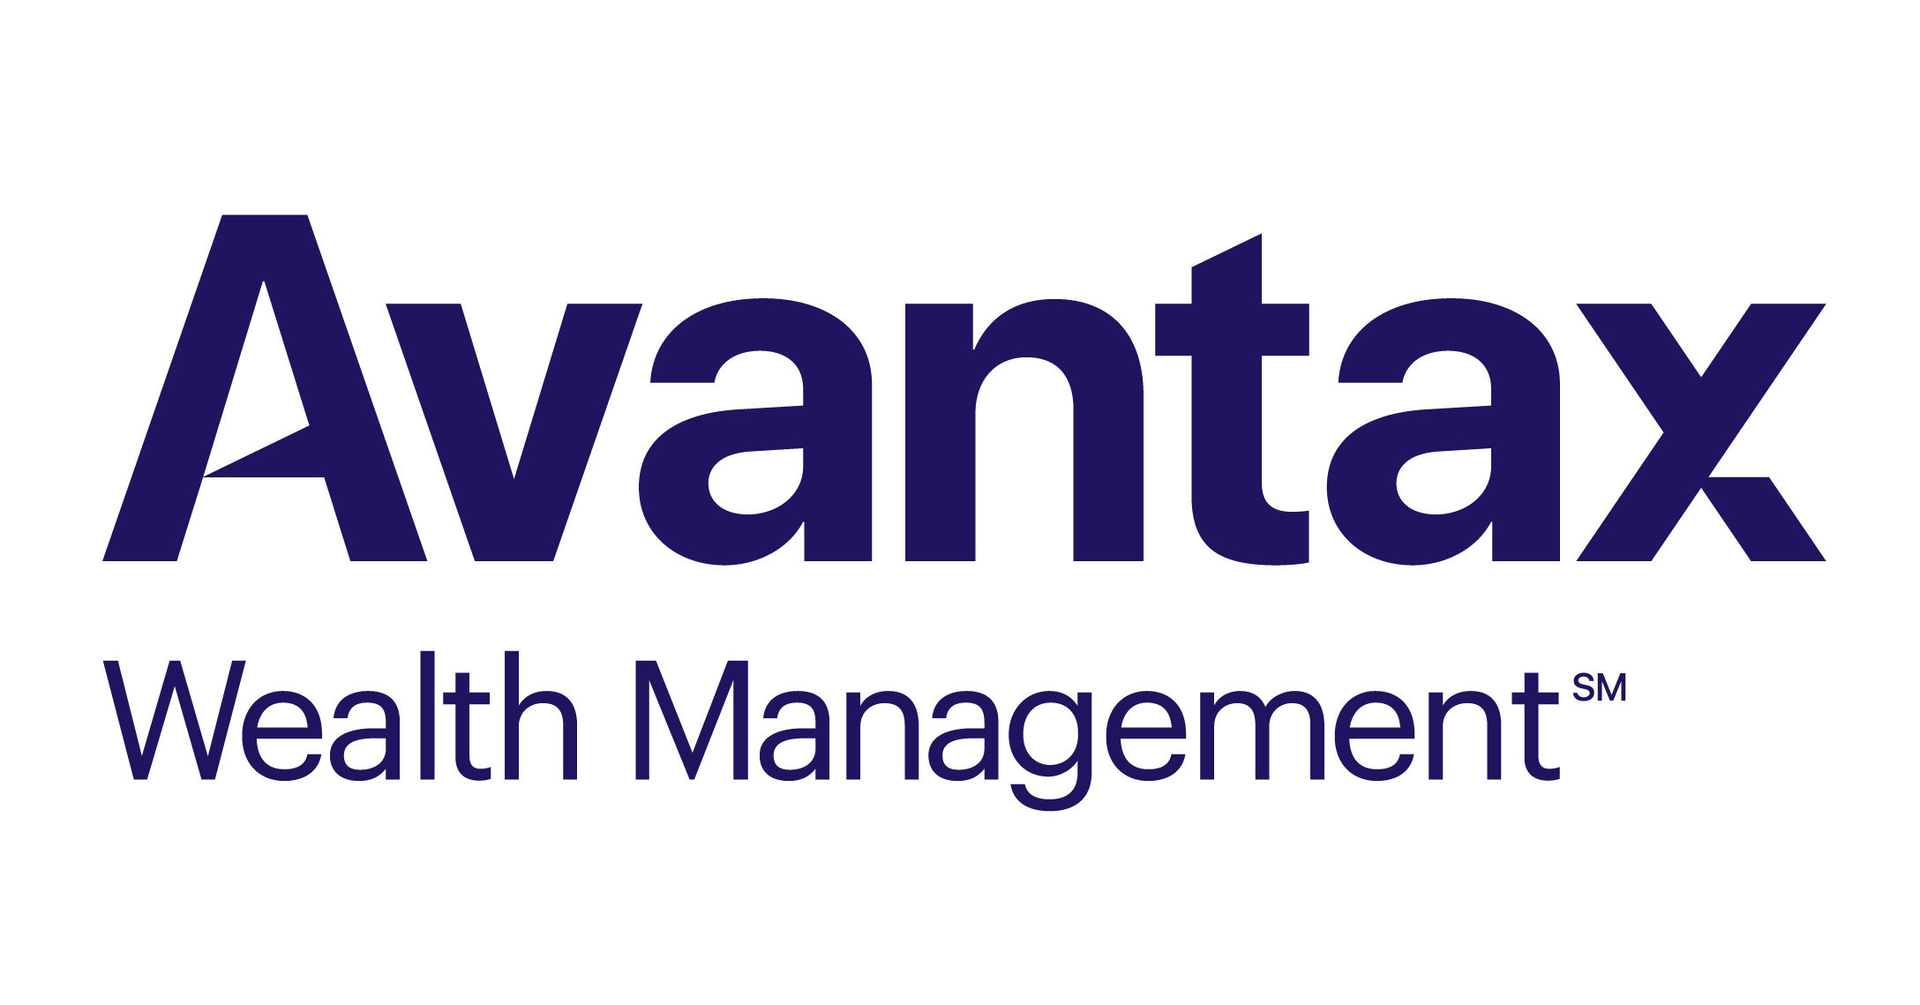 Avantax Wealth Management Hosts Nearly 1,000 Affiliates, Partners and